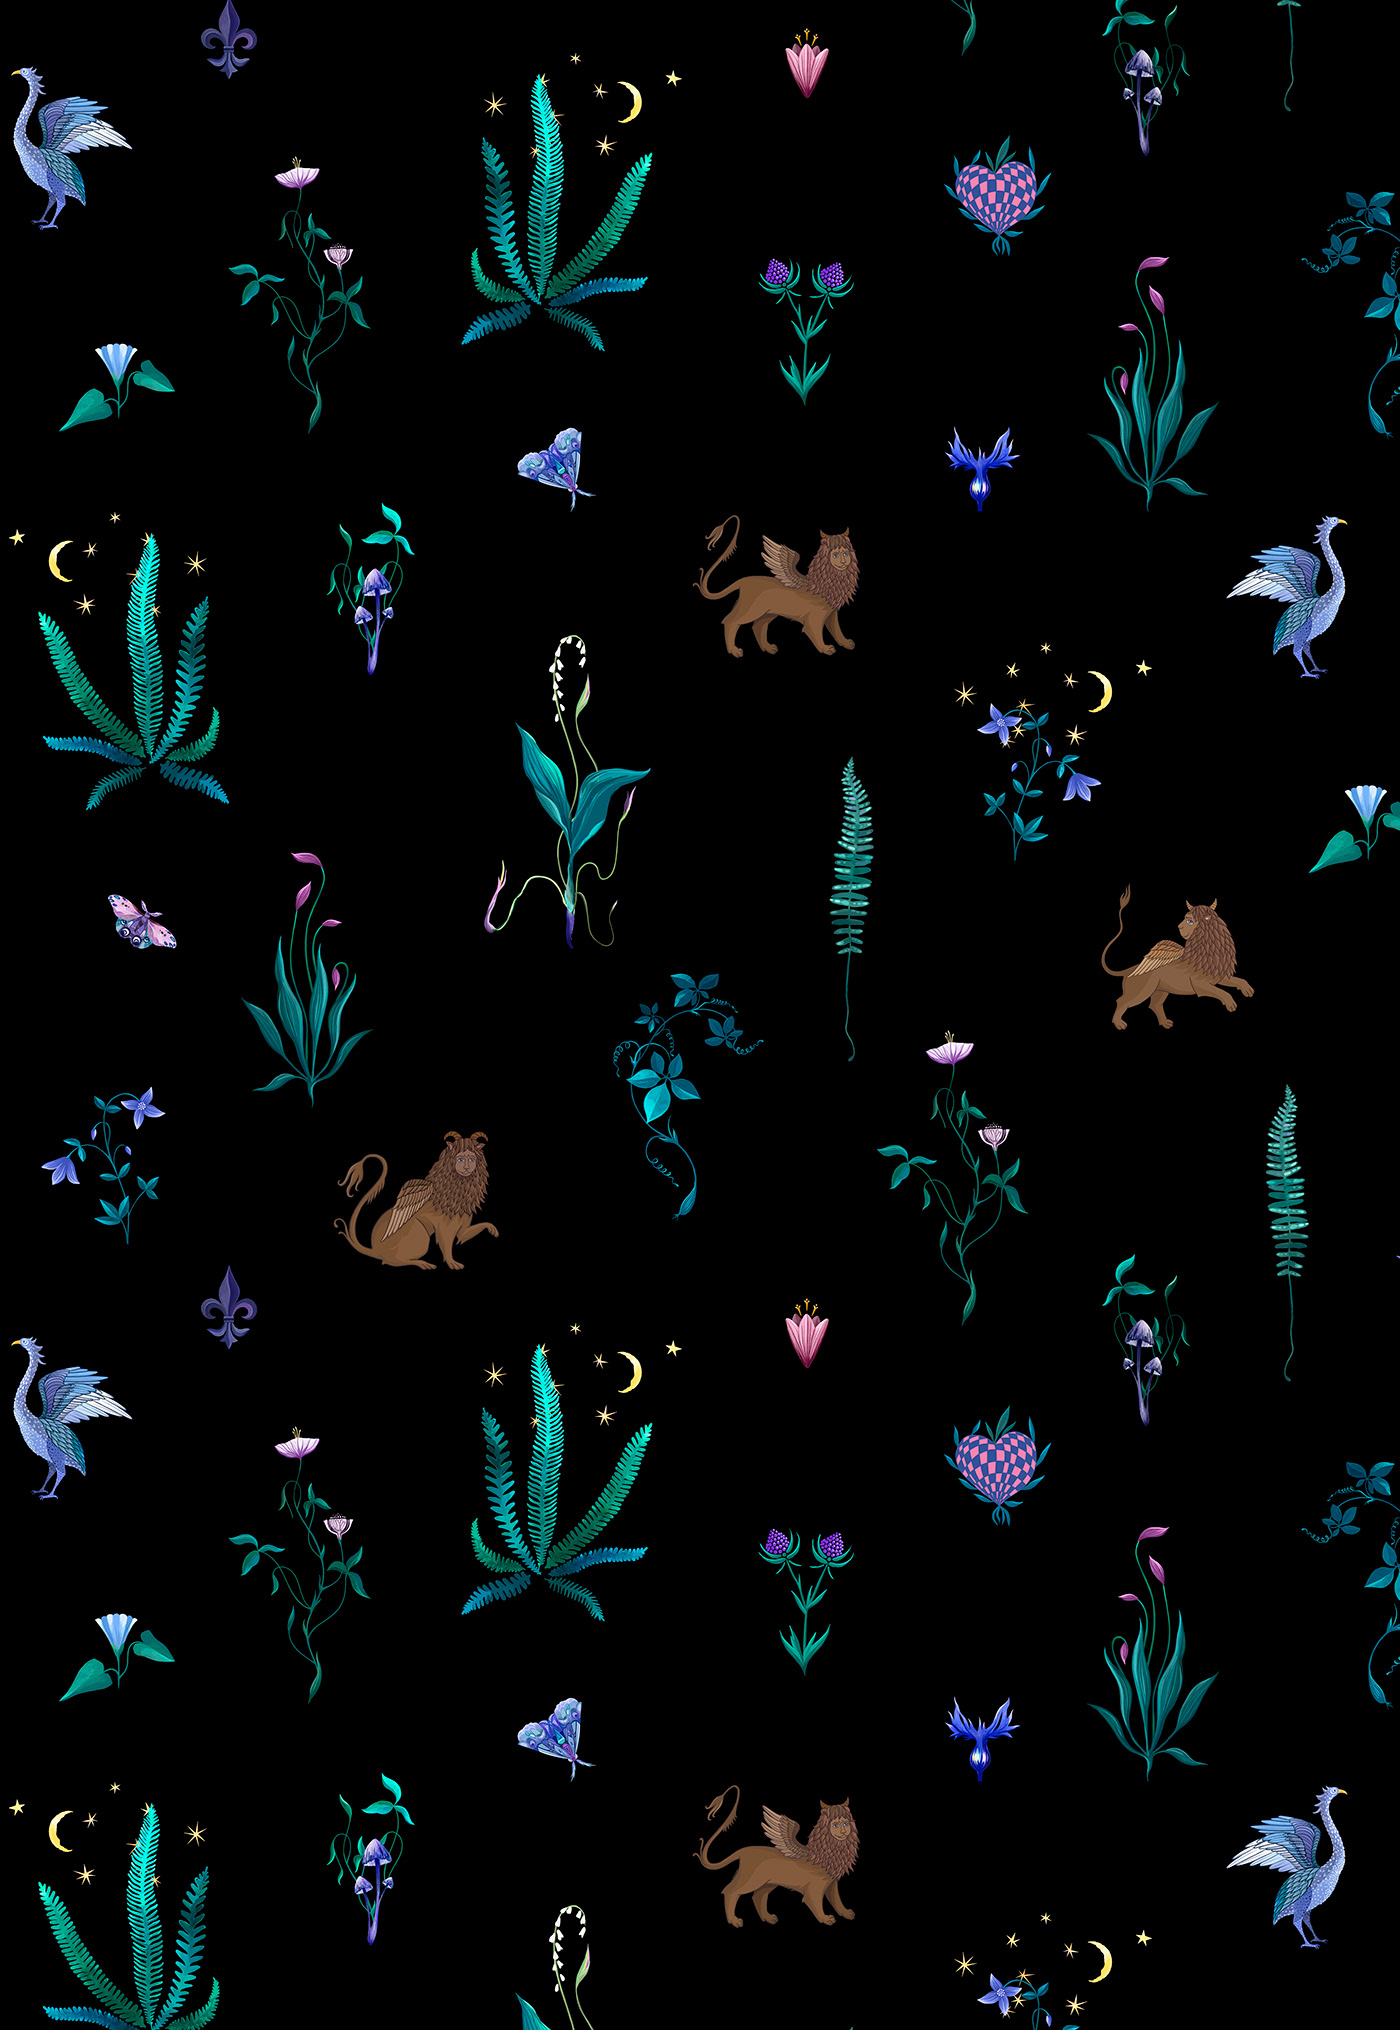 Textile pattern show a magical flowers and mysterious creatures.